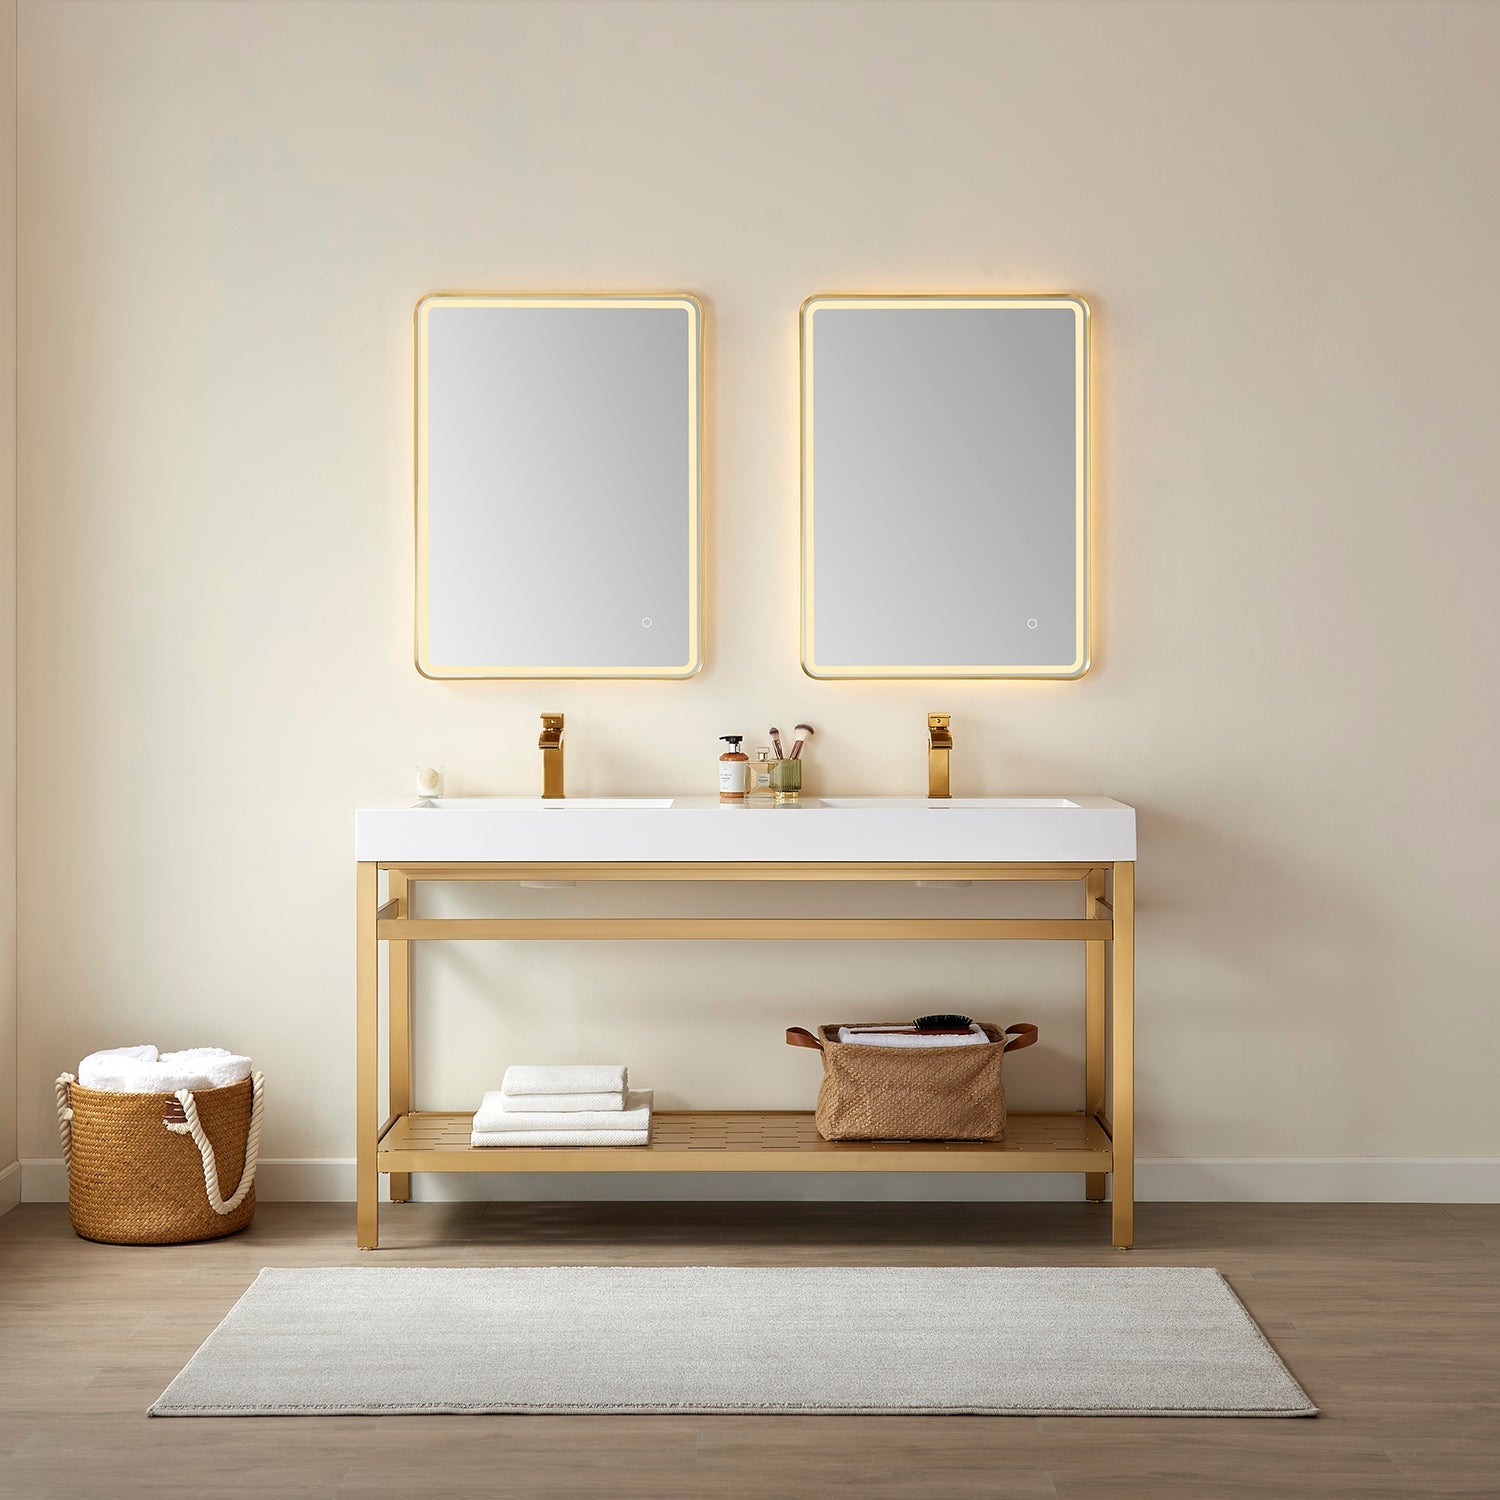 Vinnova Ablitas Double Sink Bathroom Vanity with Metal Support and White One-Piece Composite Stone Sink Top